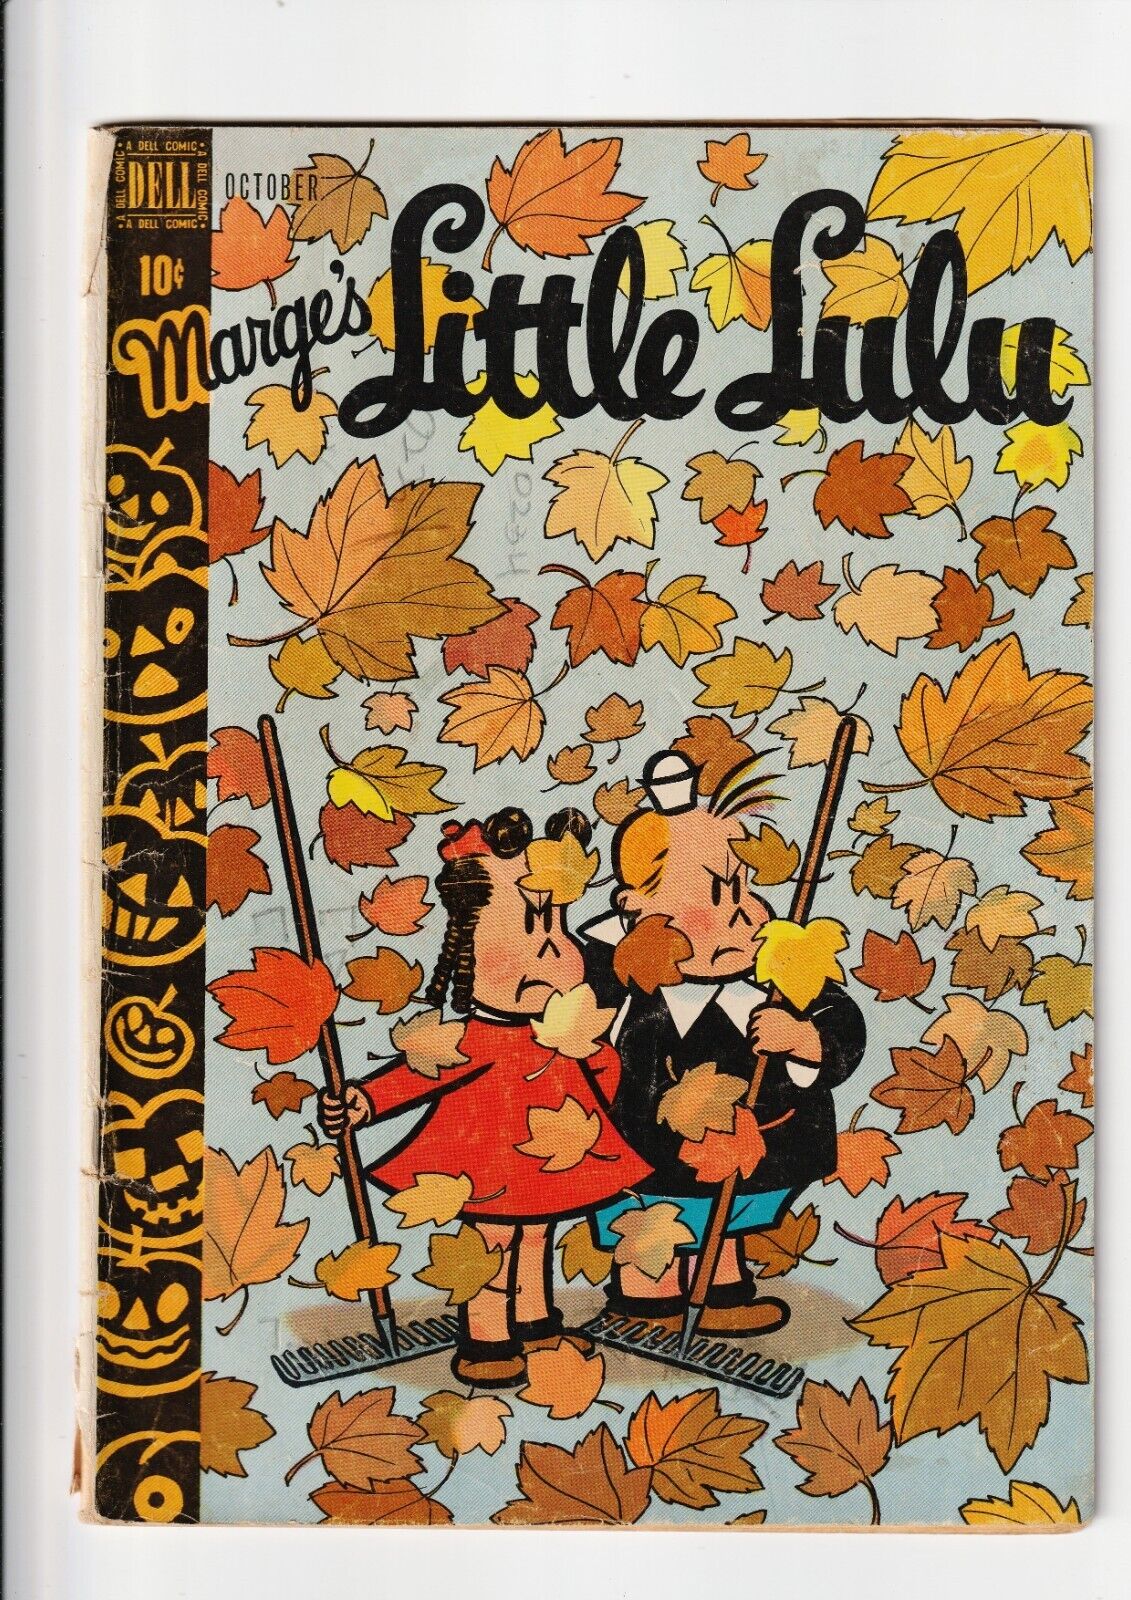 Marge's Little Lulu #16 - 1949, Dell - 1st Print